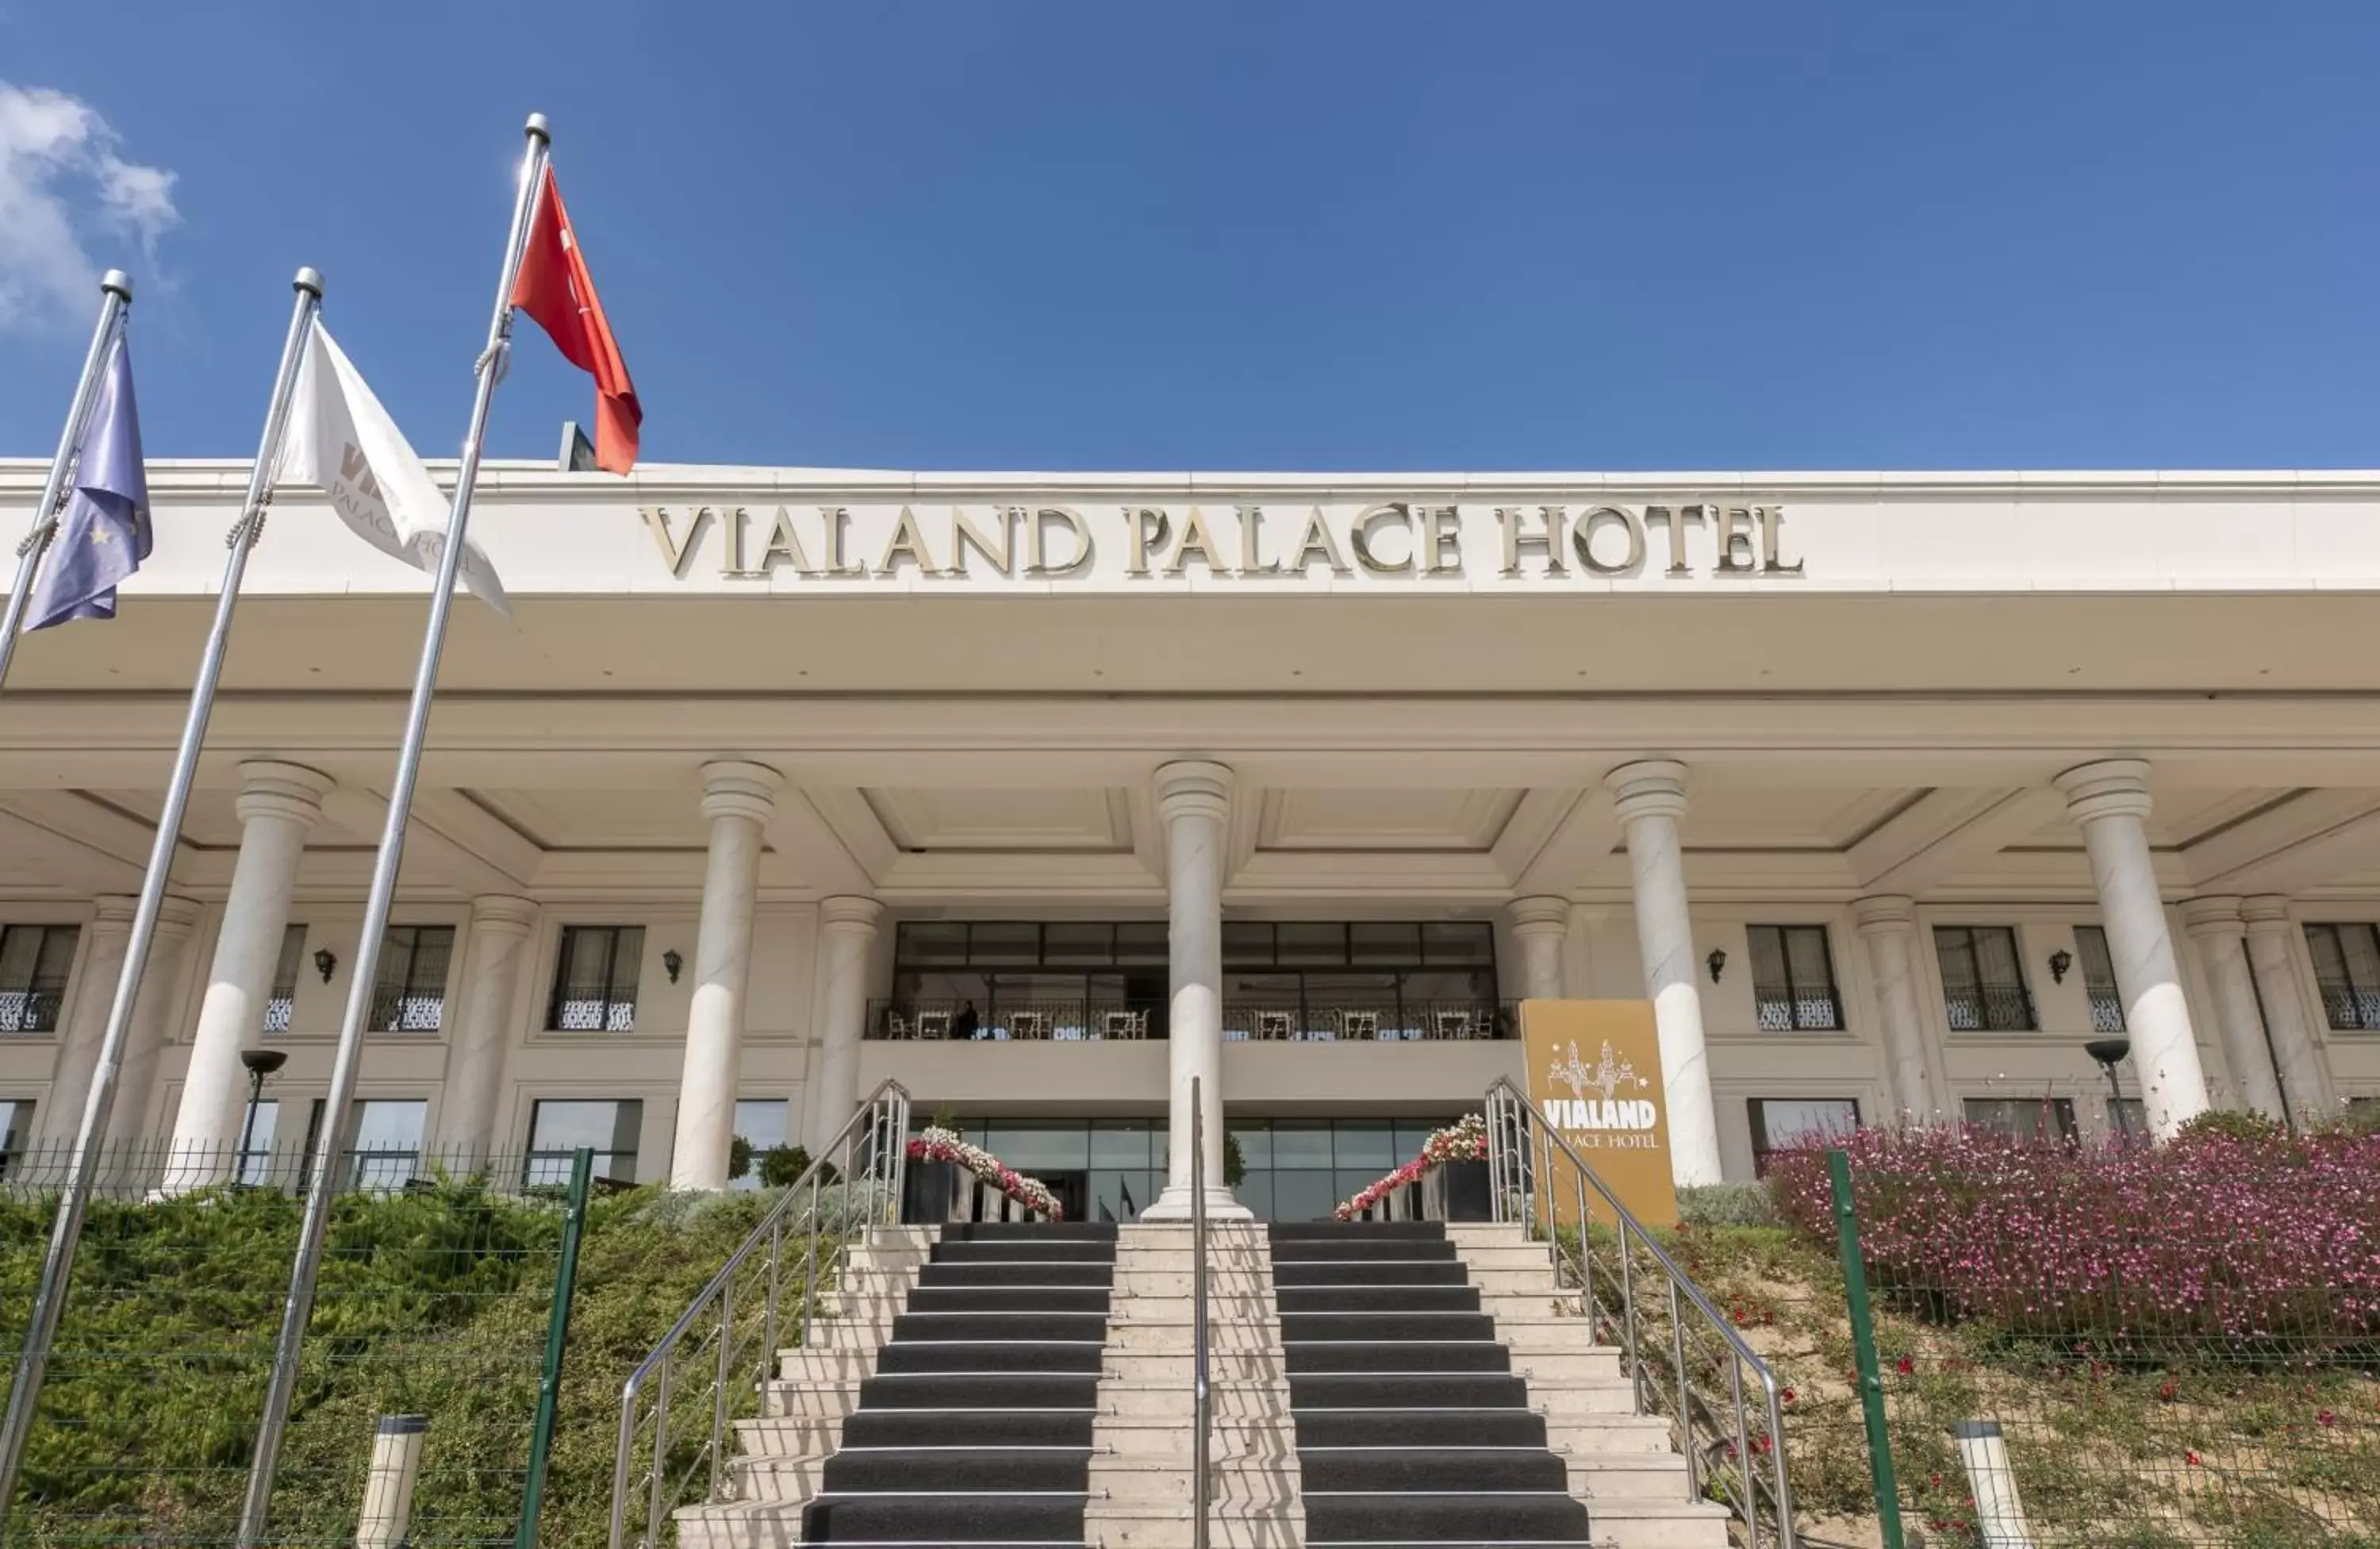 Property Building in Vialand Palace Hotel